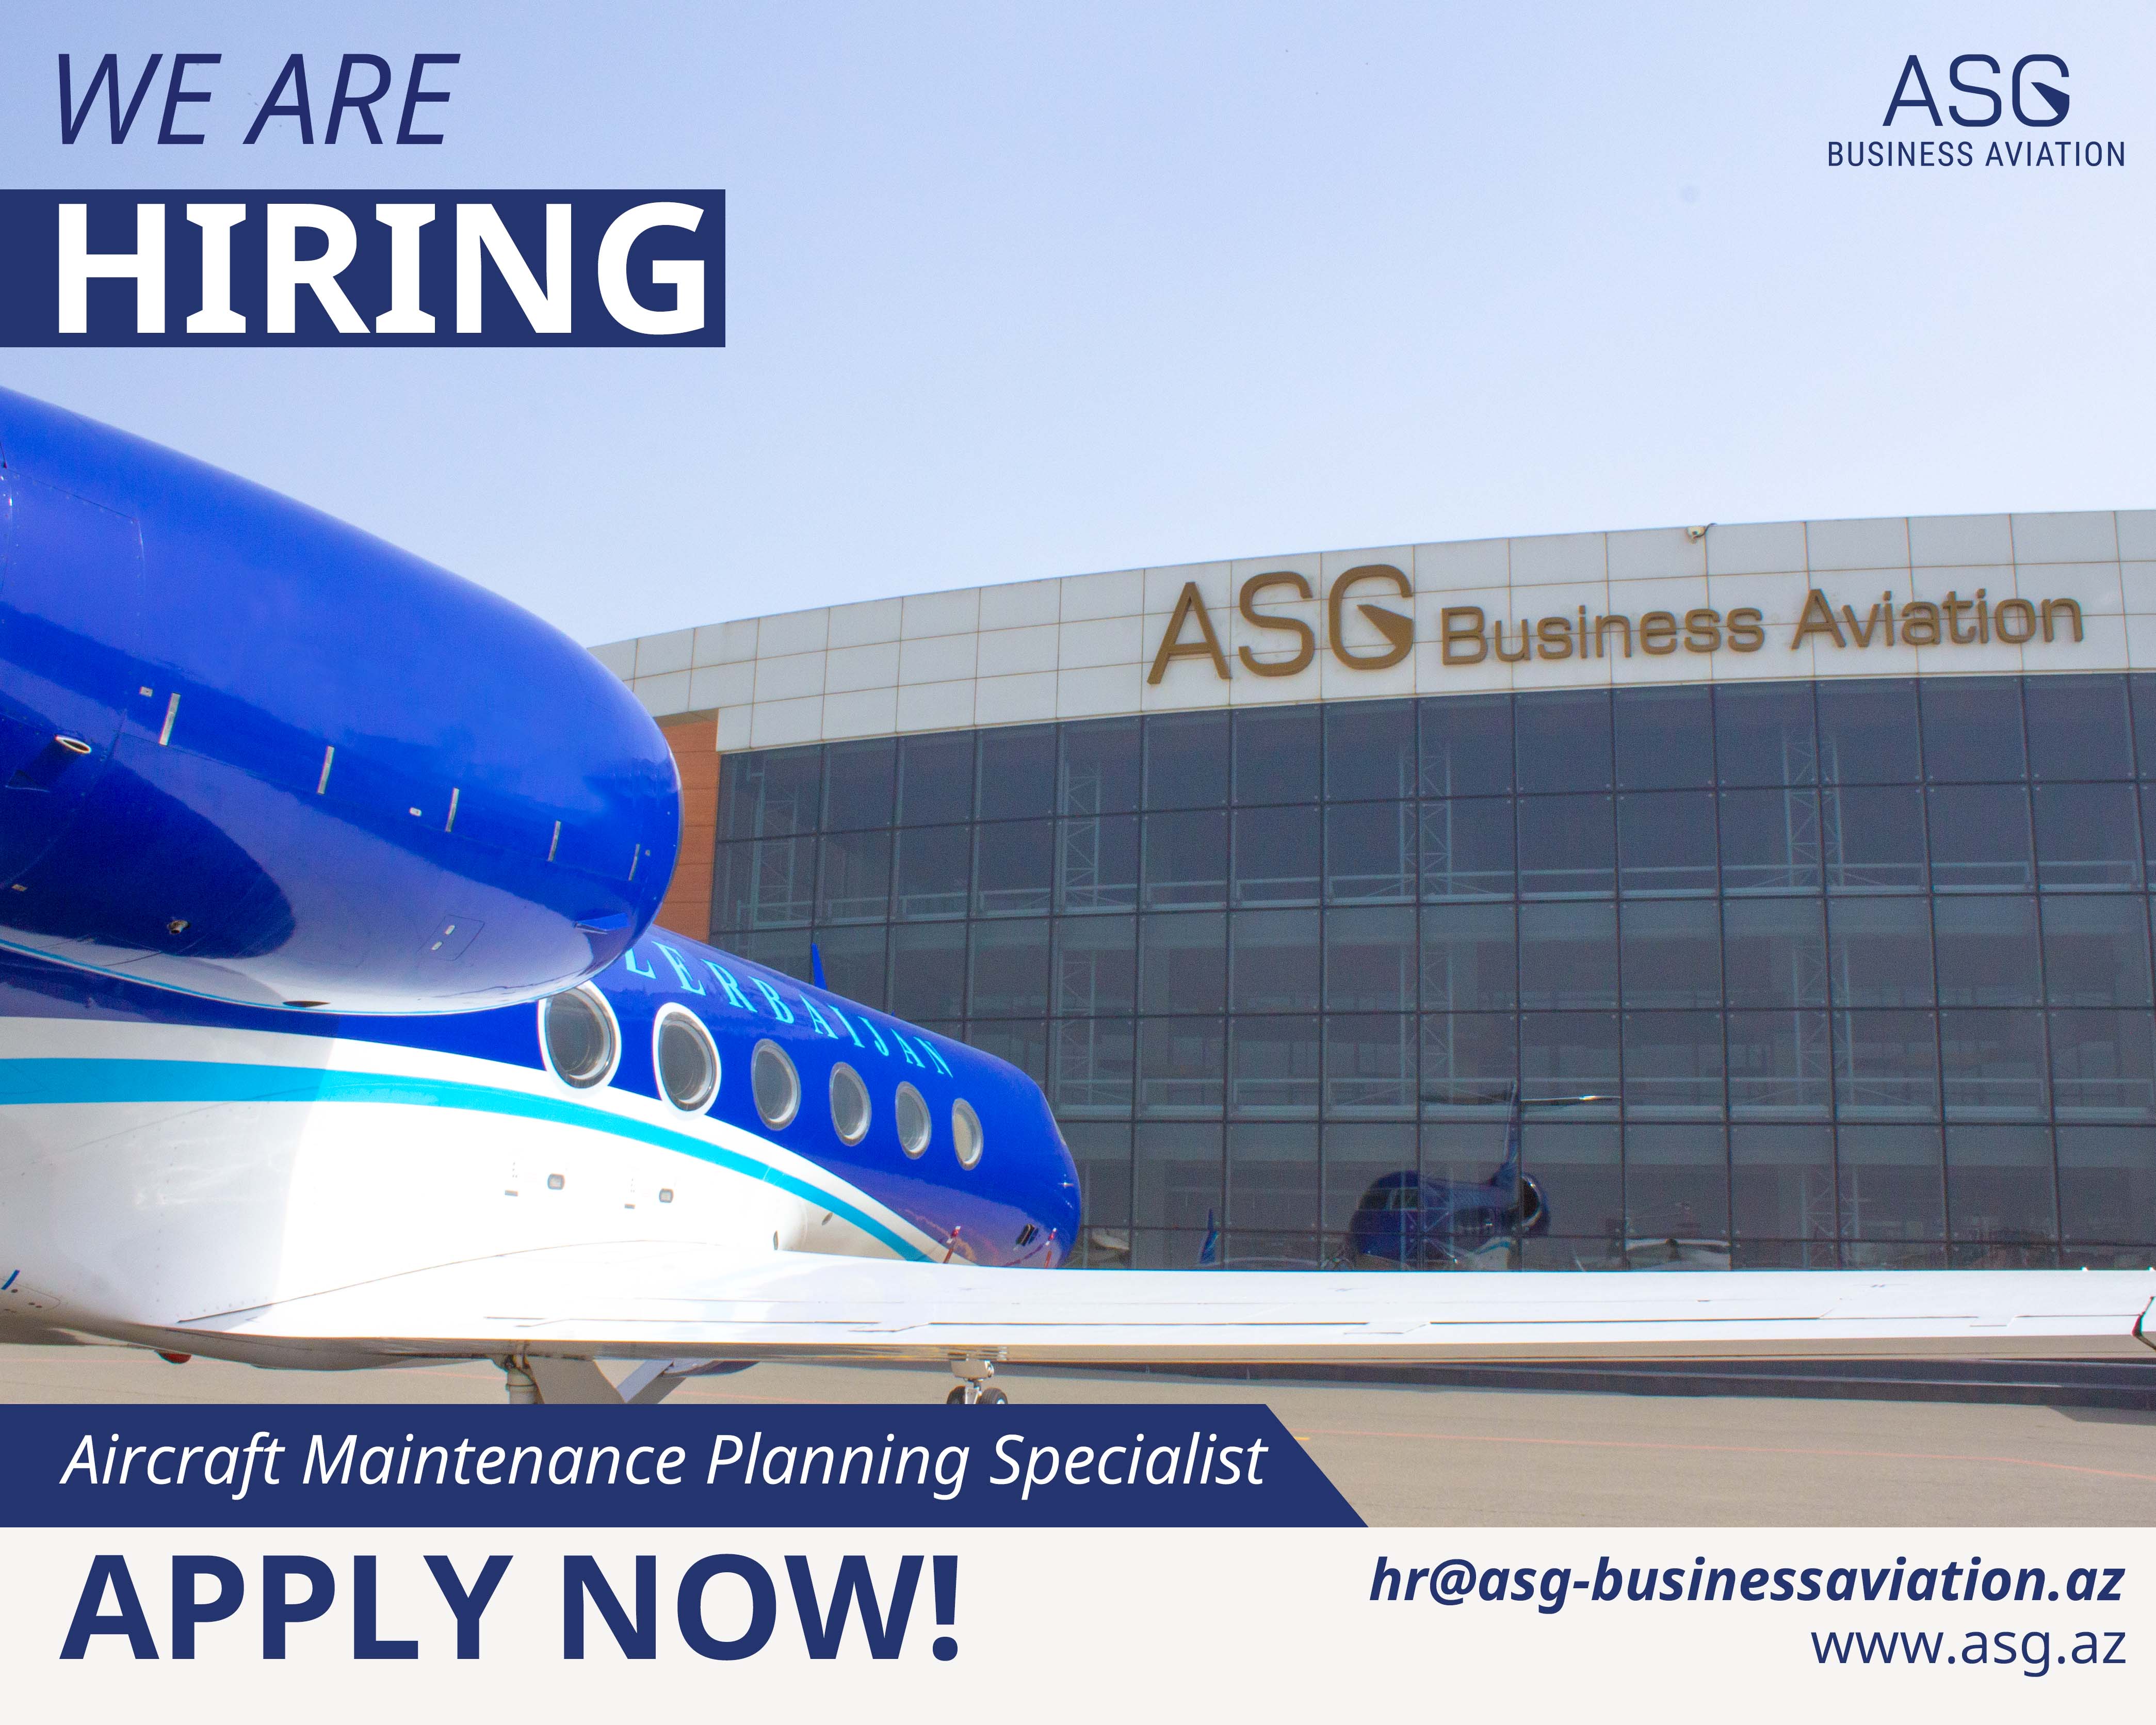 “ASG Business Aviation” is thrilled to announce for the position of Aircraft Maintenance Planning Specialist